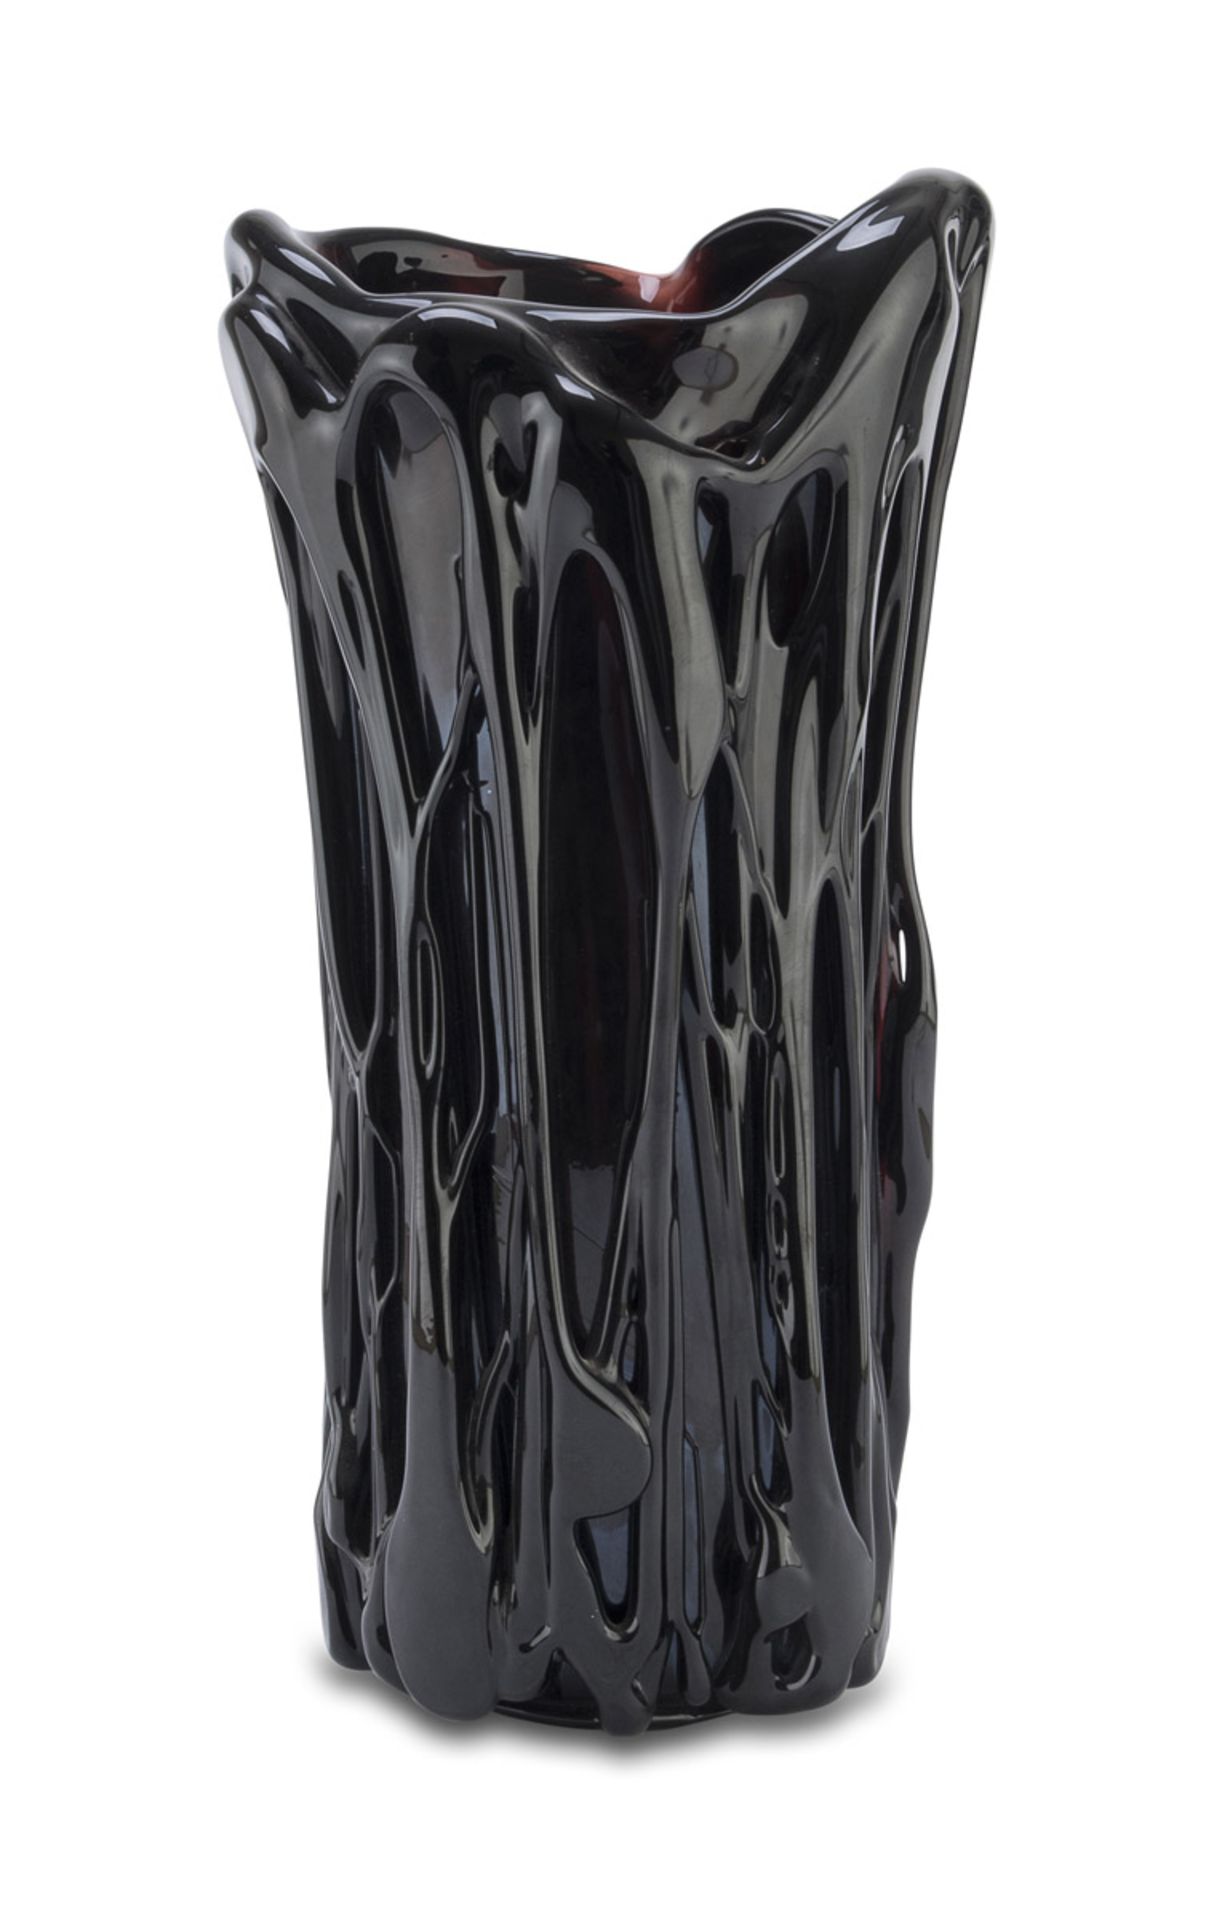 BIG GLASS VASE BY ENRICO CAMOZZO LATE 1960s